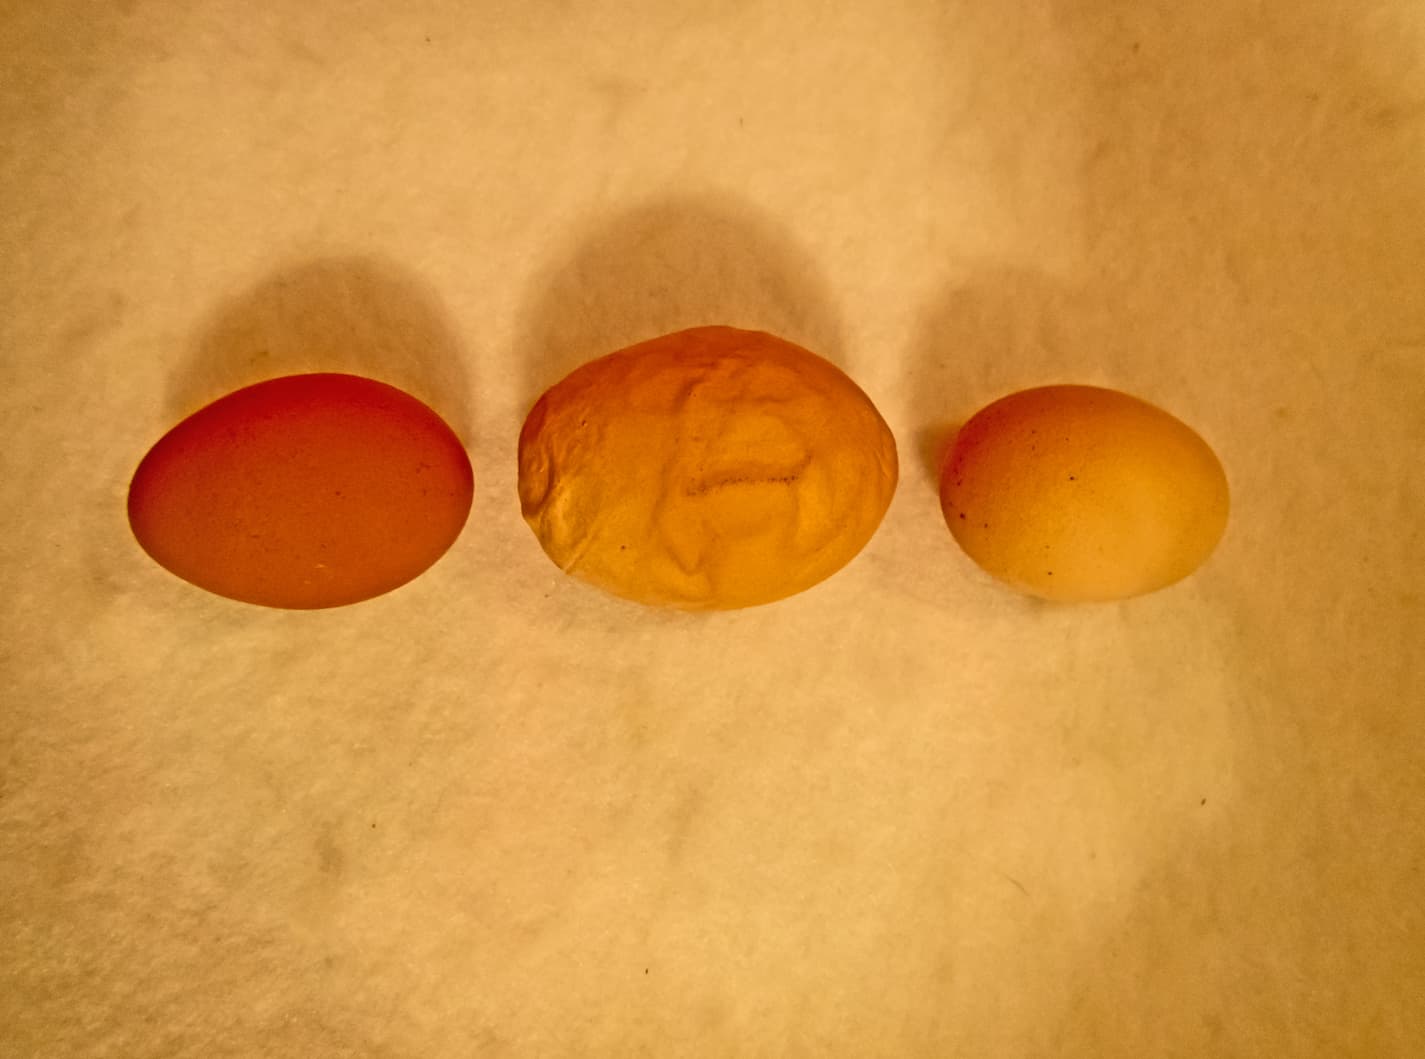 An image of various eggs and an imperfect egg